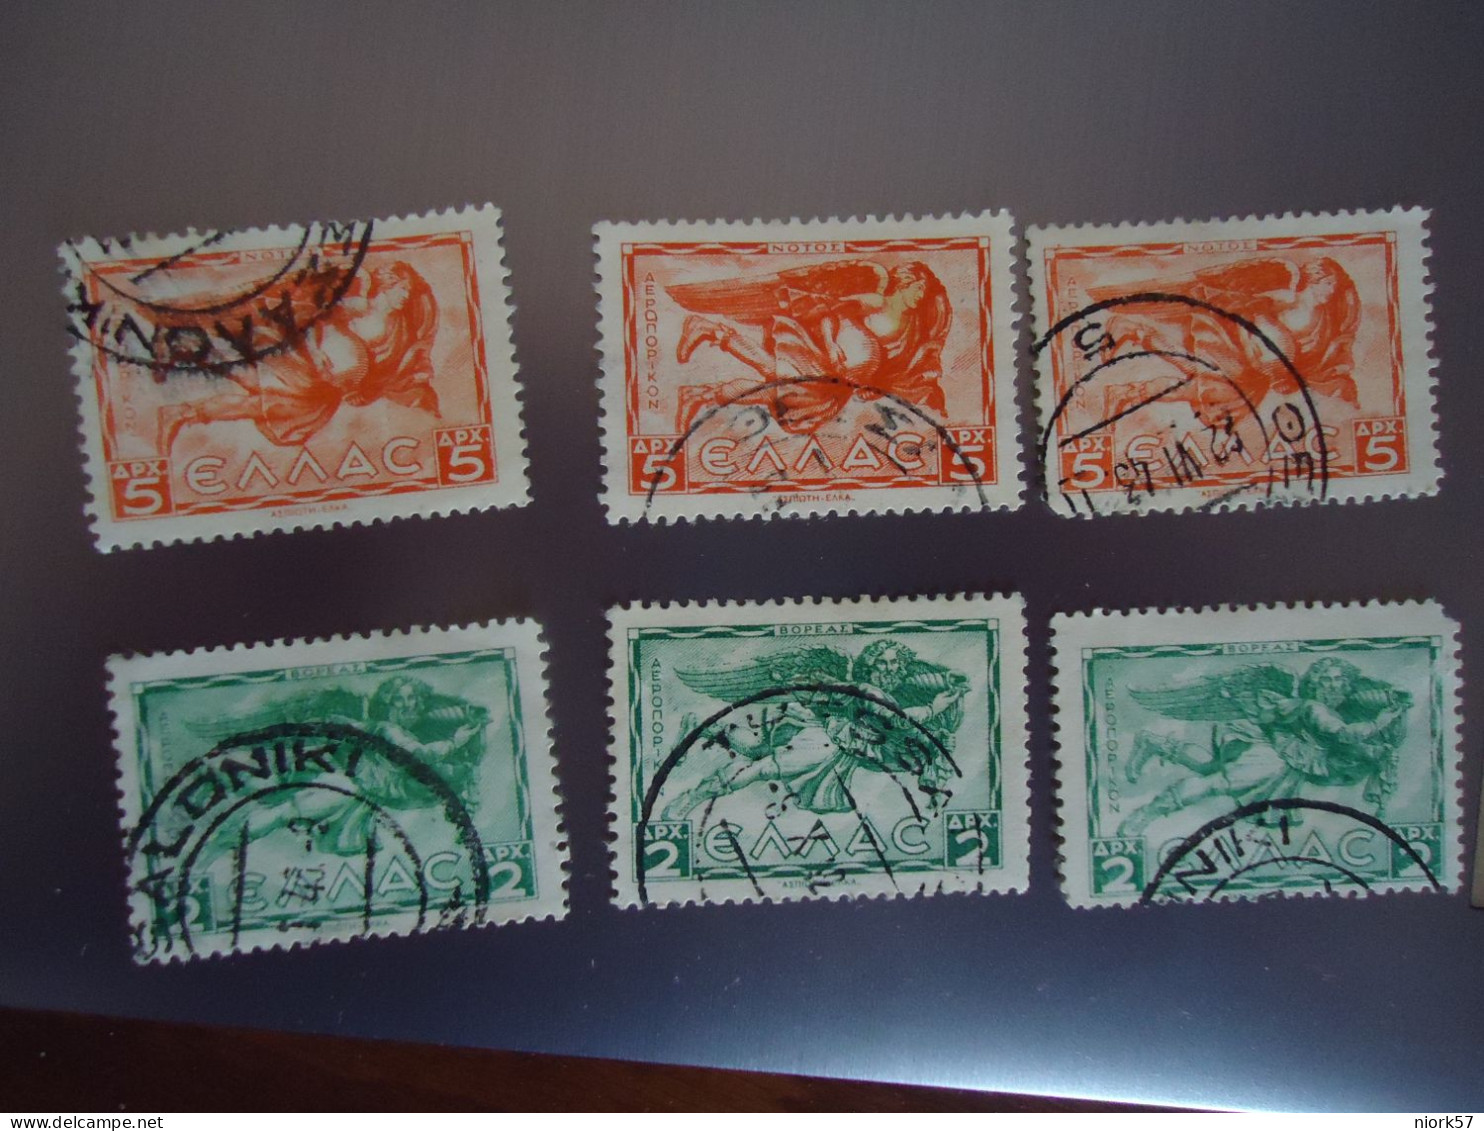 GREECE  USED  6 STAMPS  1942-  AIR WINDS - Machine Labels [ATM]